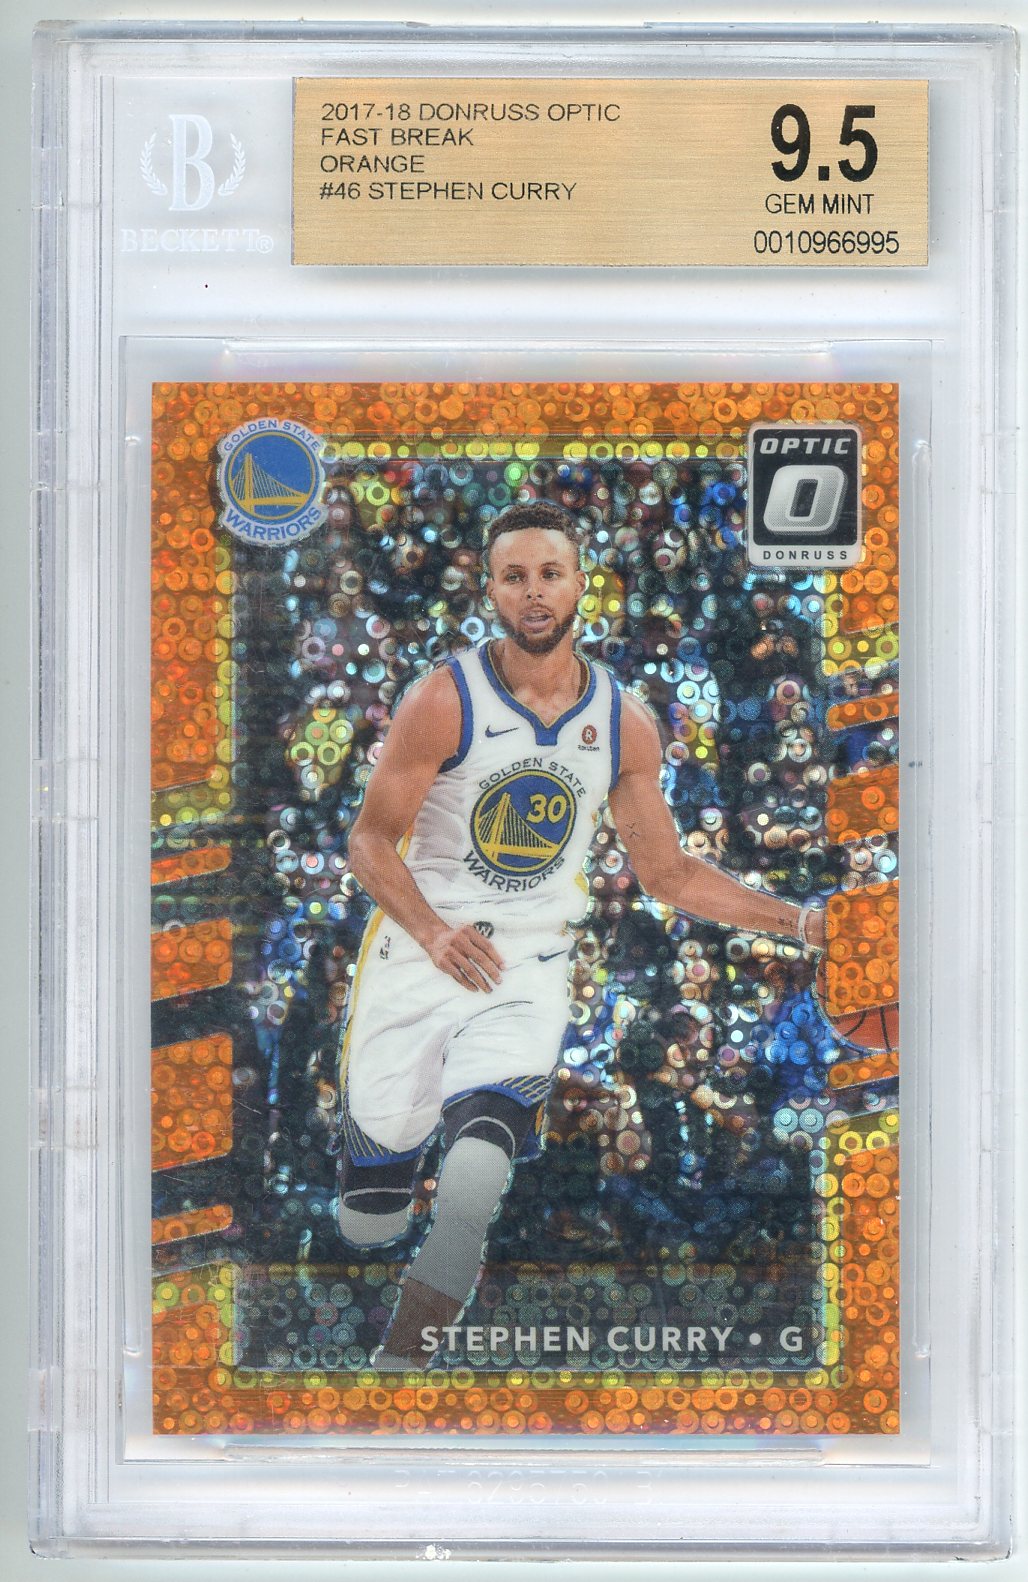 Stephen Curry Autographed 2017-18 Donruss Card #46 Golden State